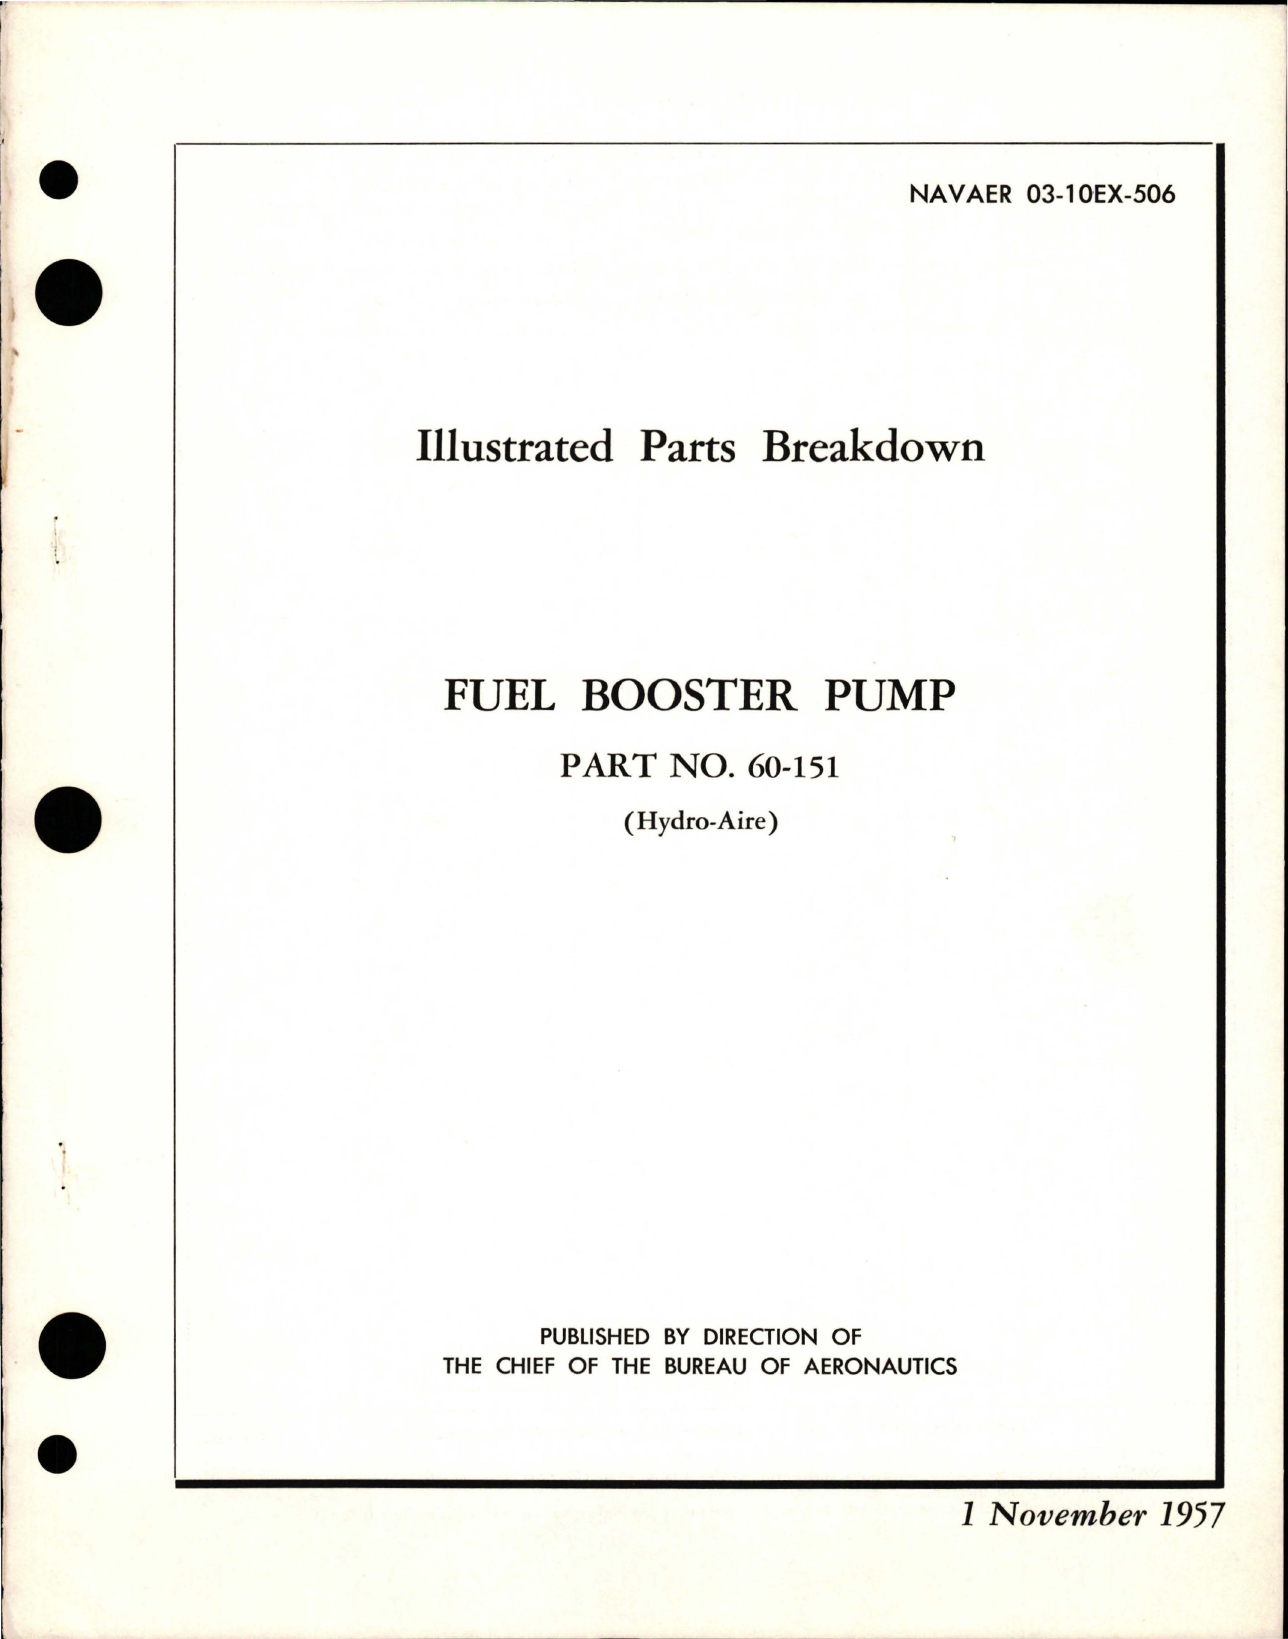 Sample page 1 from AirCorps Library document: Illustrated Parts Breakdown for Fuel Booster Pump - Part 60-151